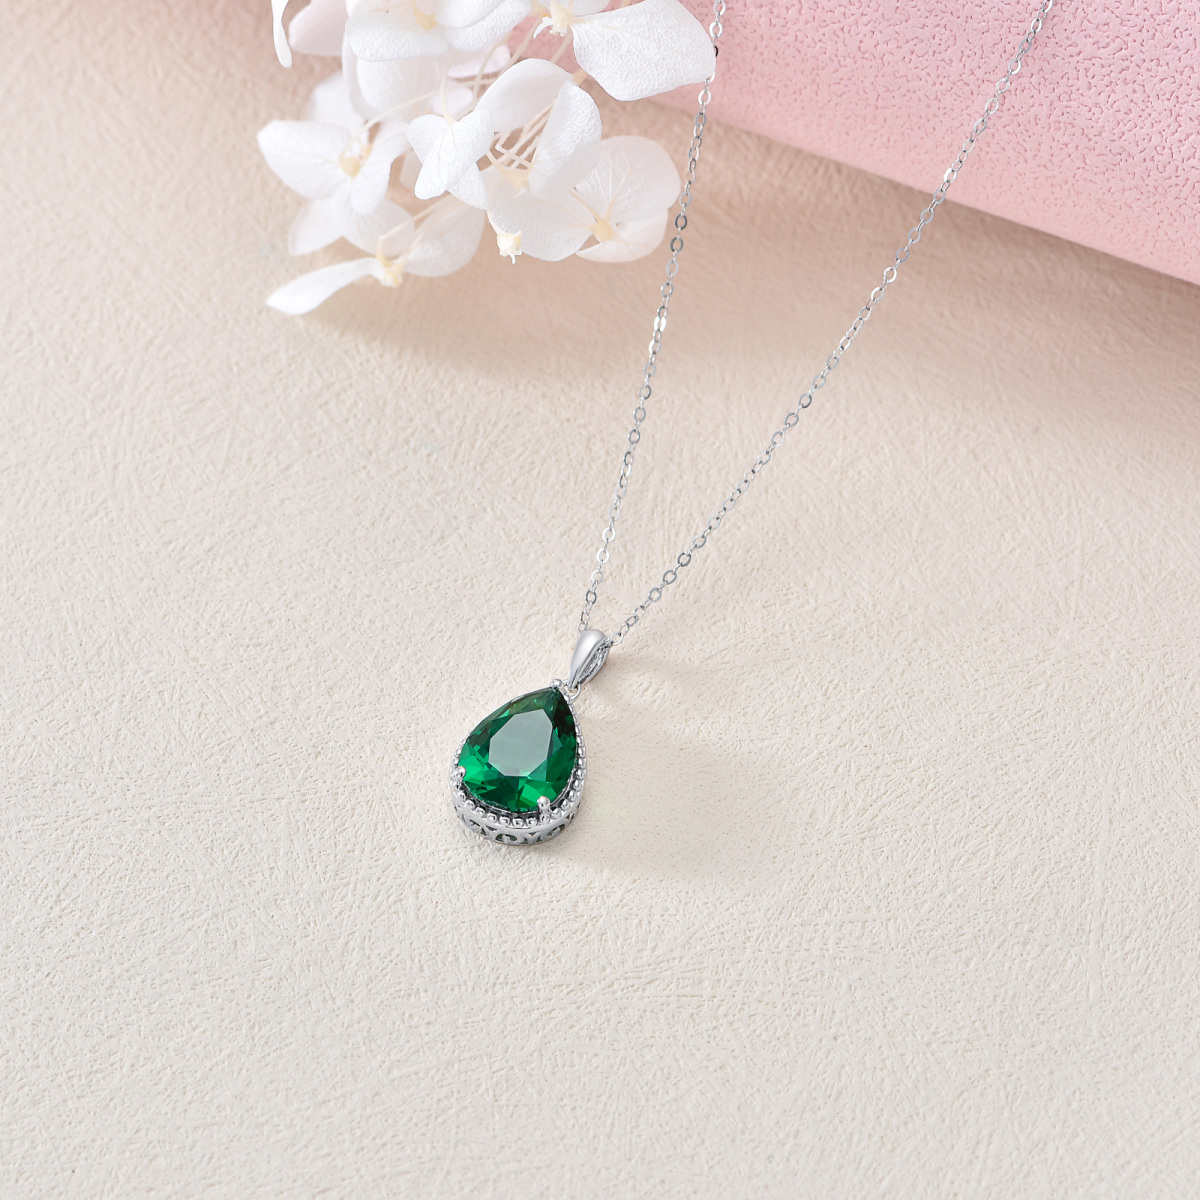 9K White Gold Pear Shaped Emerald Pendant Necklace-4